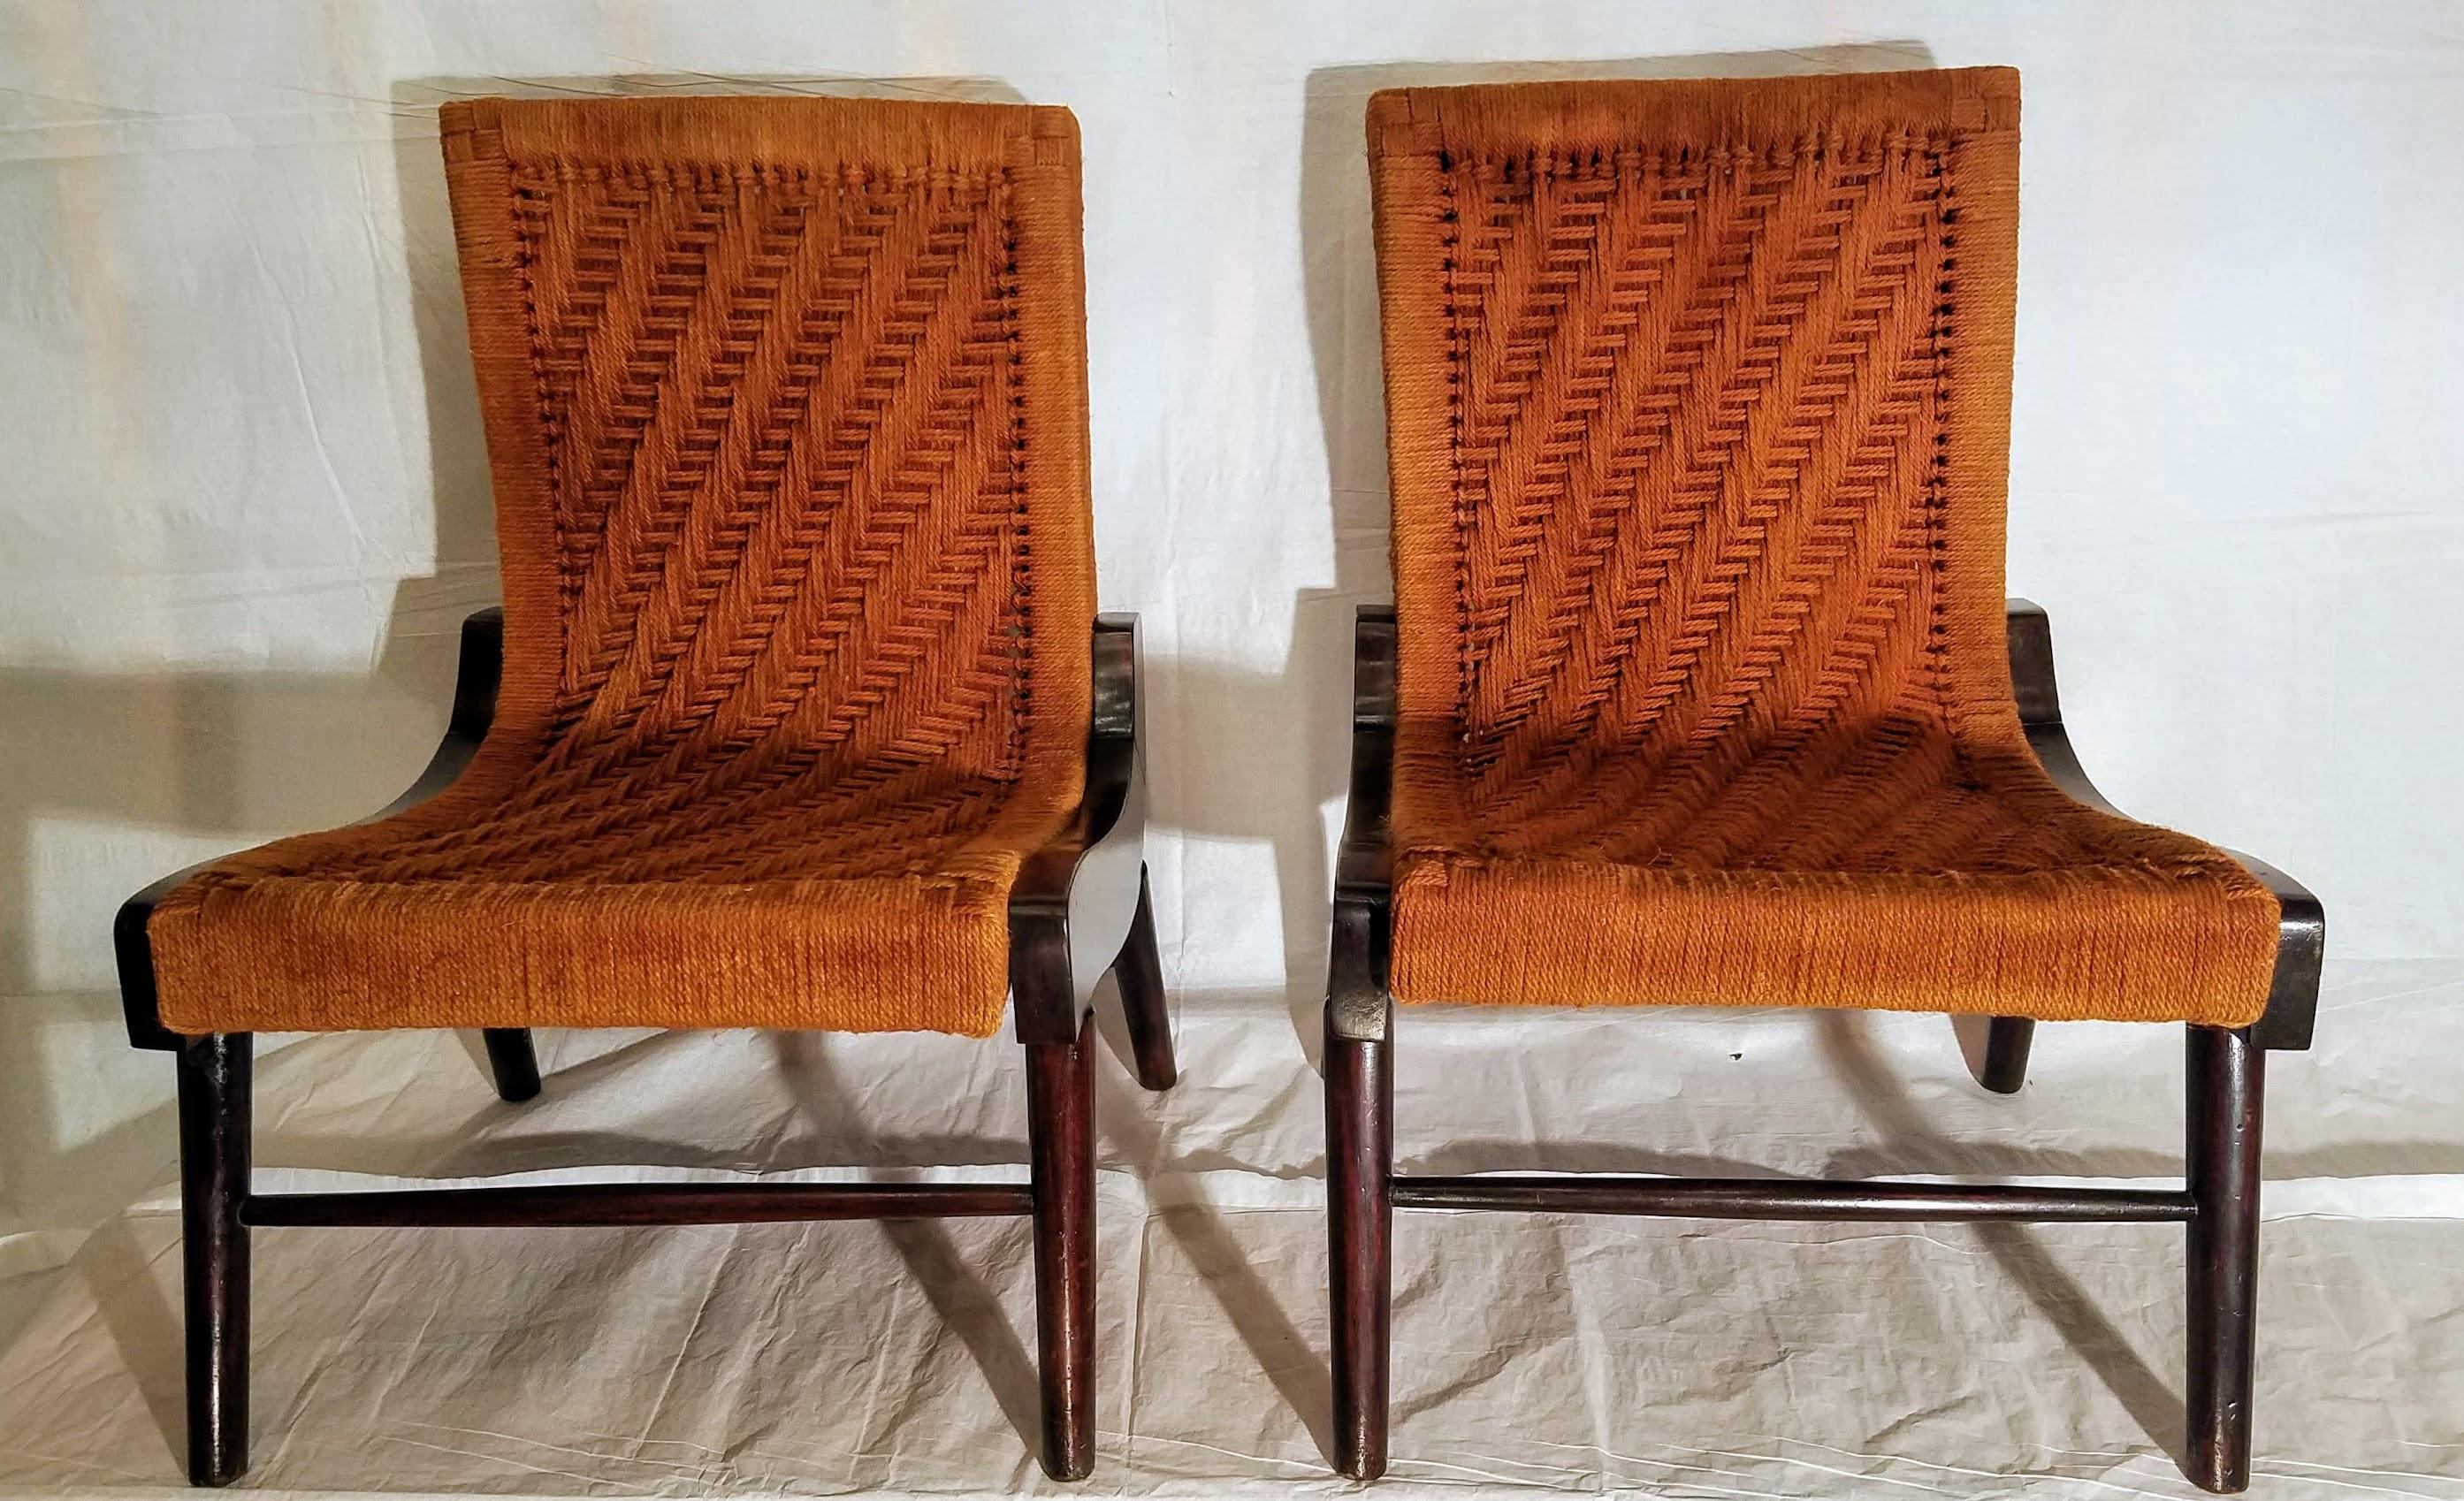 Pair of rare cocobolo rosewood South American lounge chairs wrapped in hemp cord in a herringbone pattern.
The chairs were brought back to Virginia by an OSS officer stationed in Central America during World War II.
The seats have been rewrapped